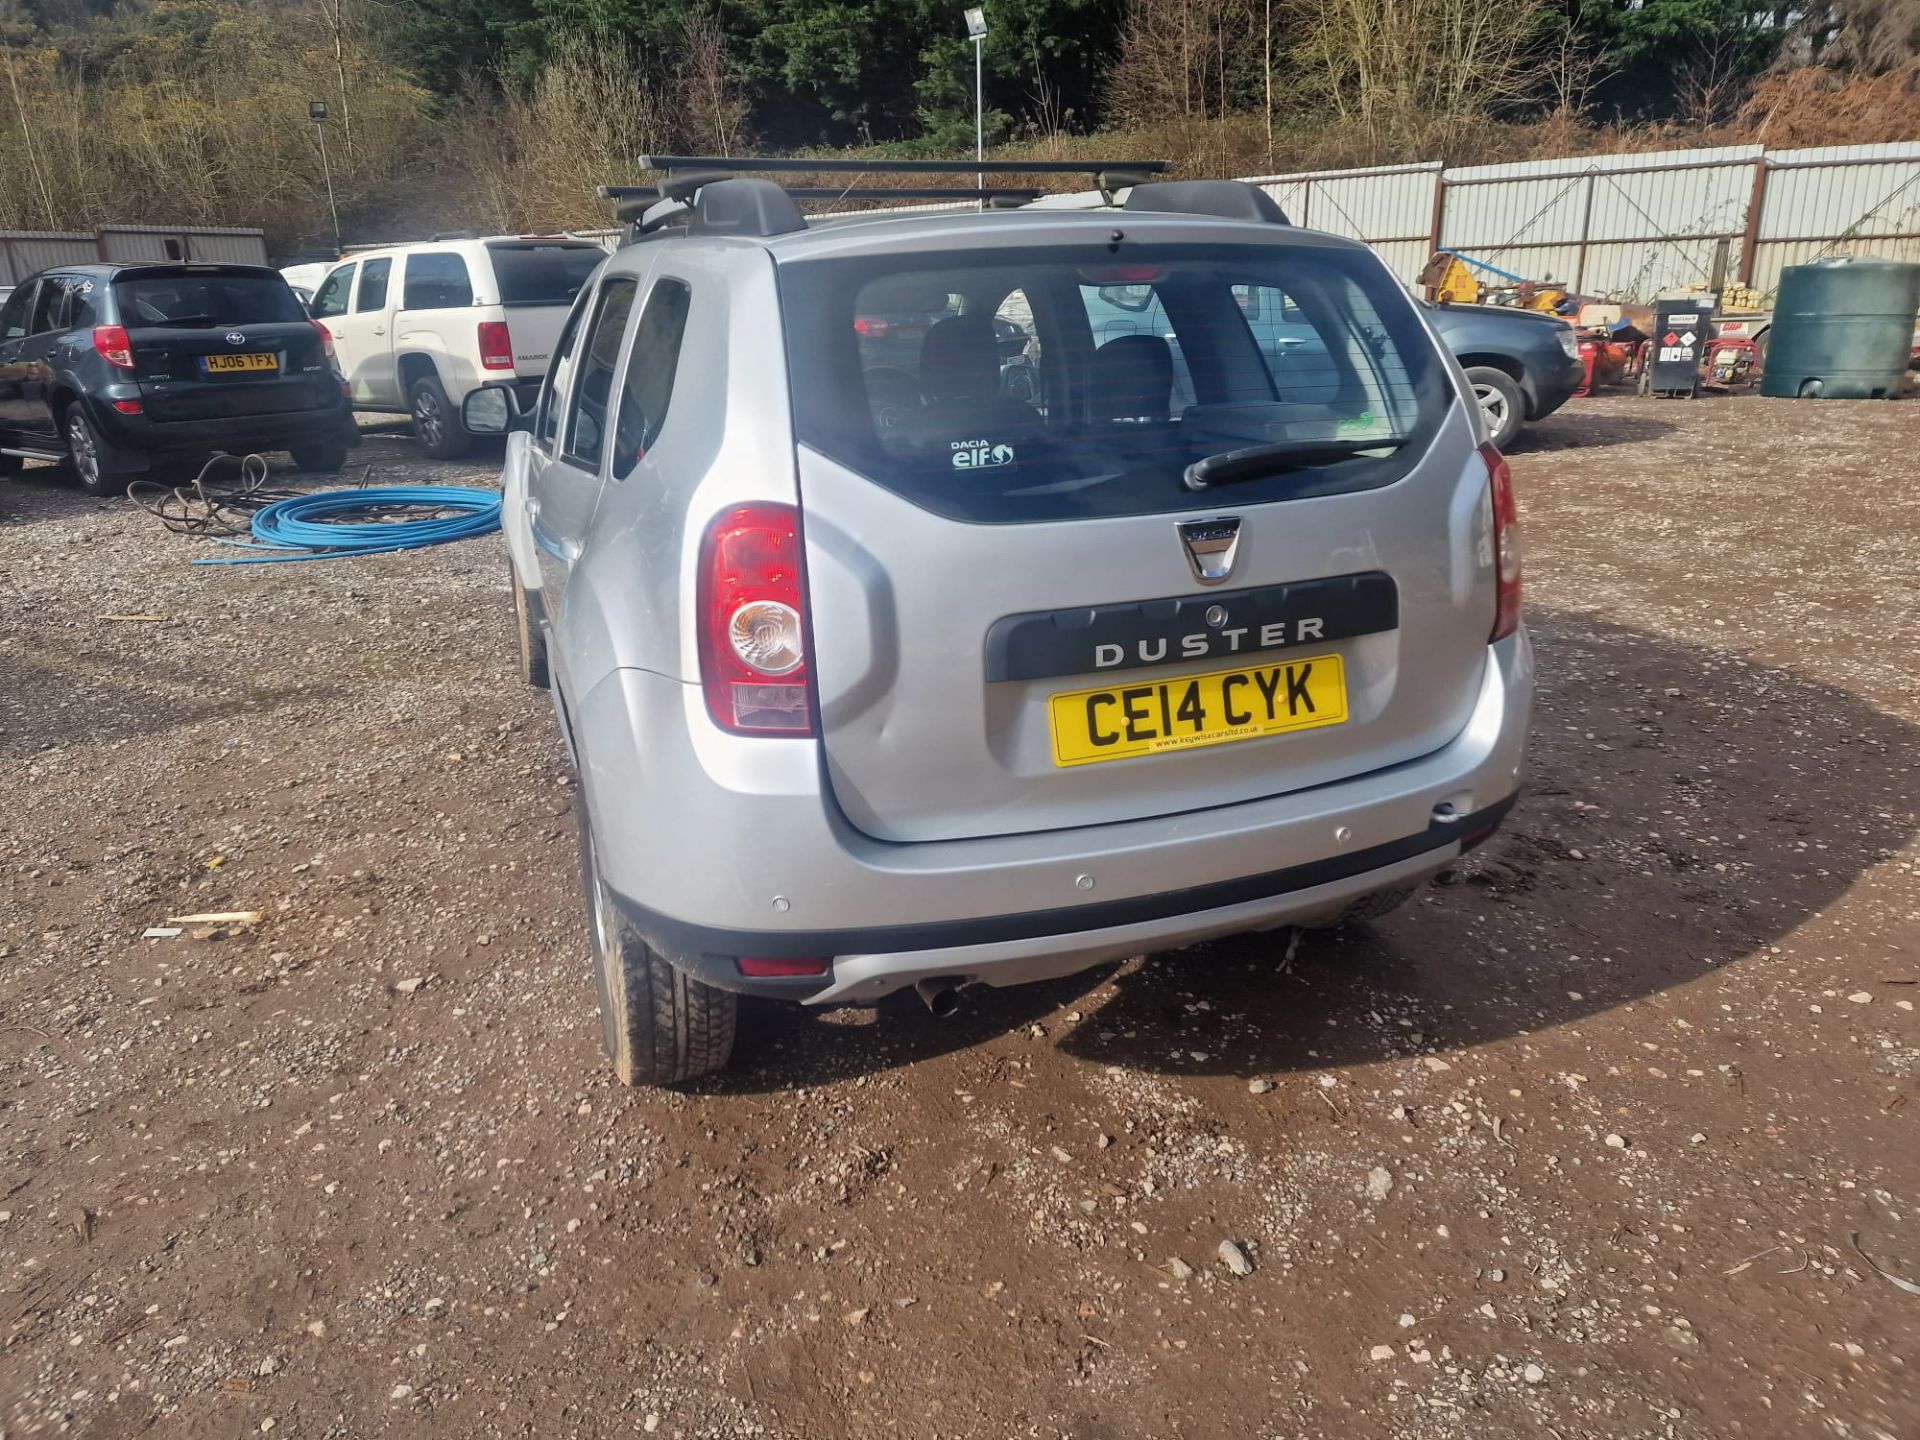 14/14 DACIA DUSTER LAUREATE DCI 4X2 - 1461cc 5dr Hatchback (Silver) - Image 9 of 12